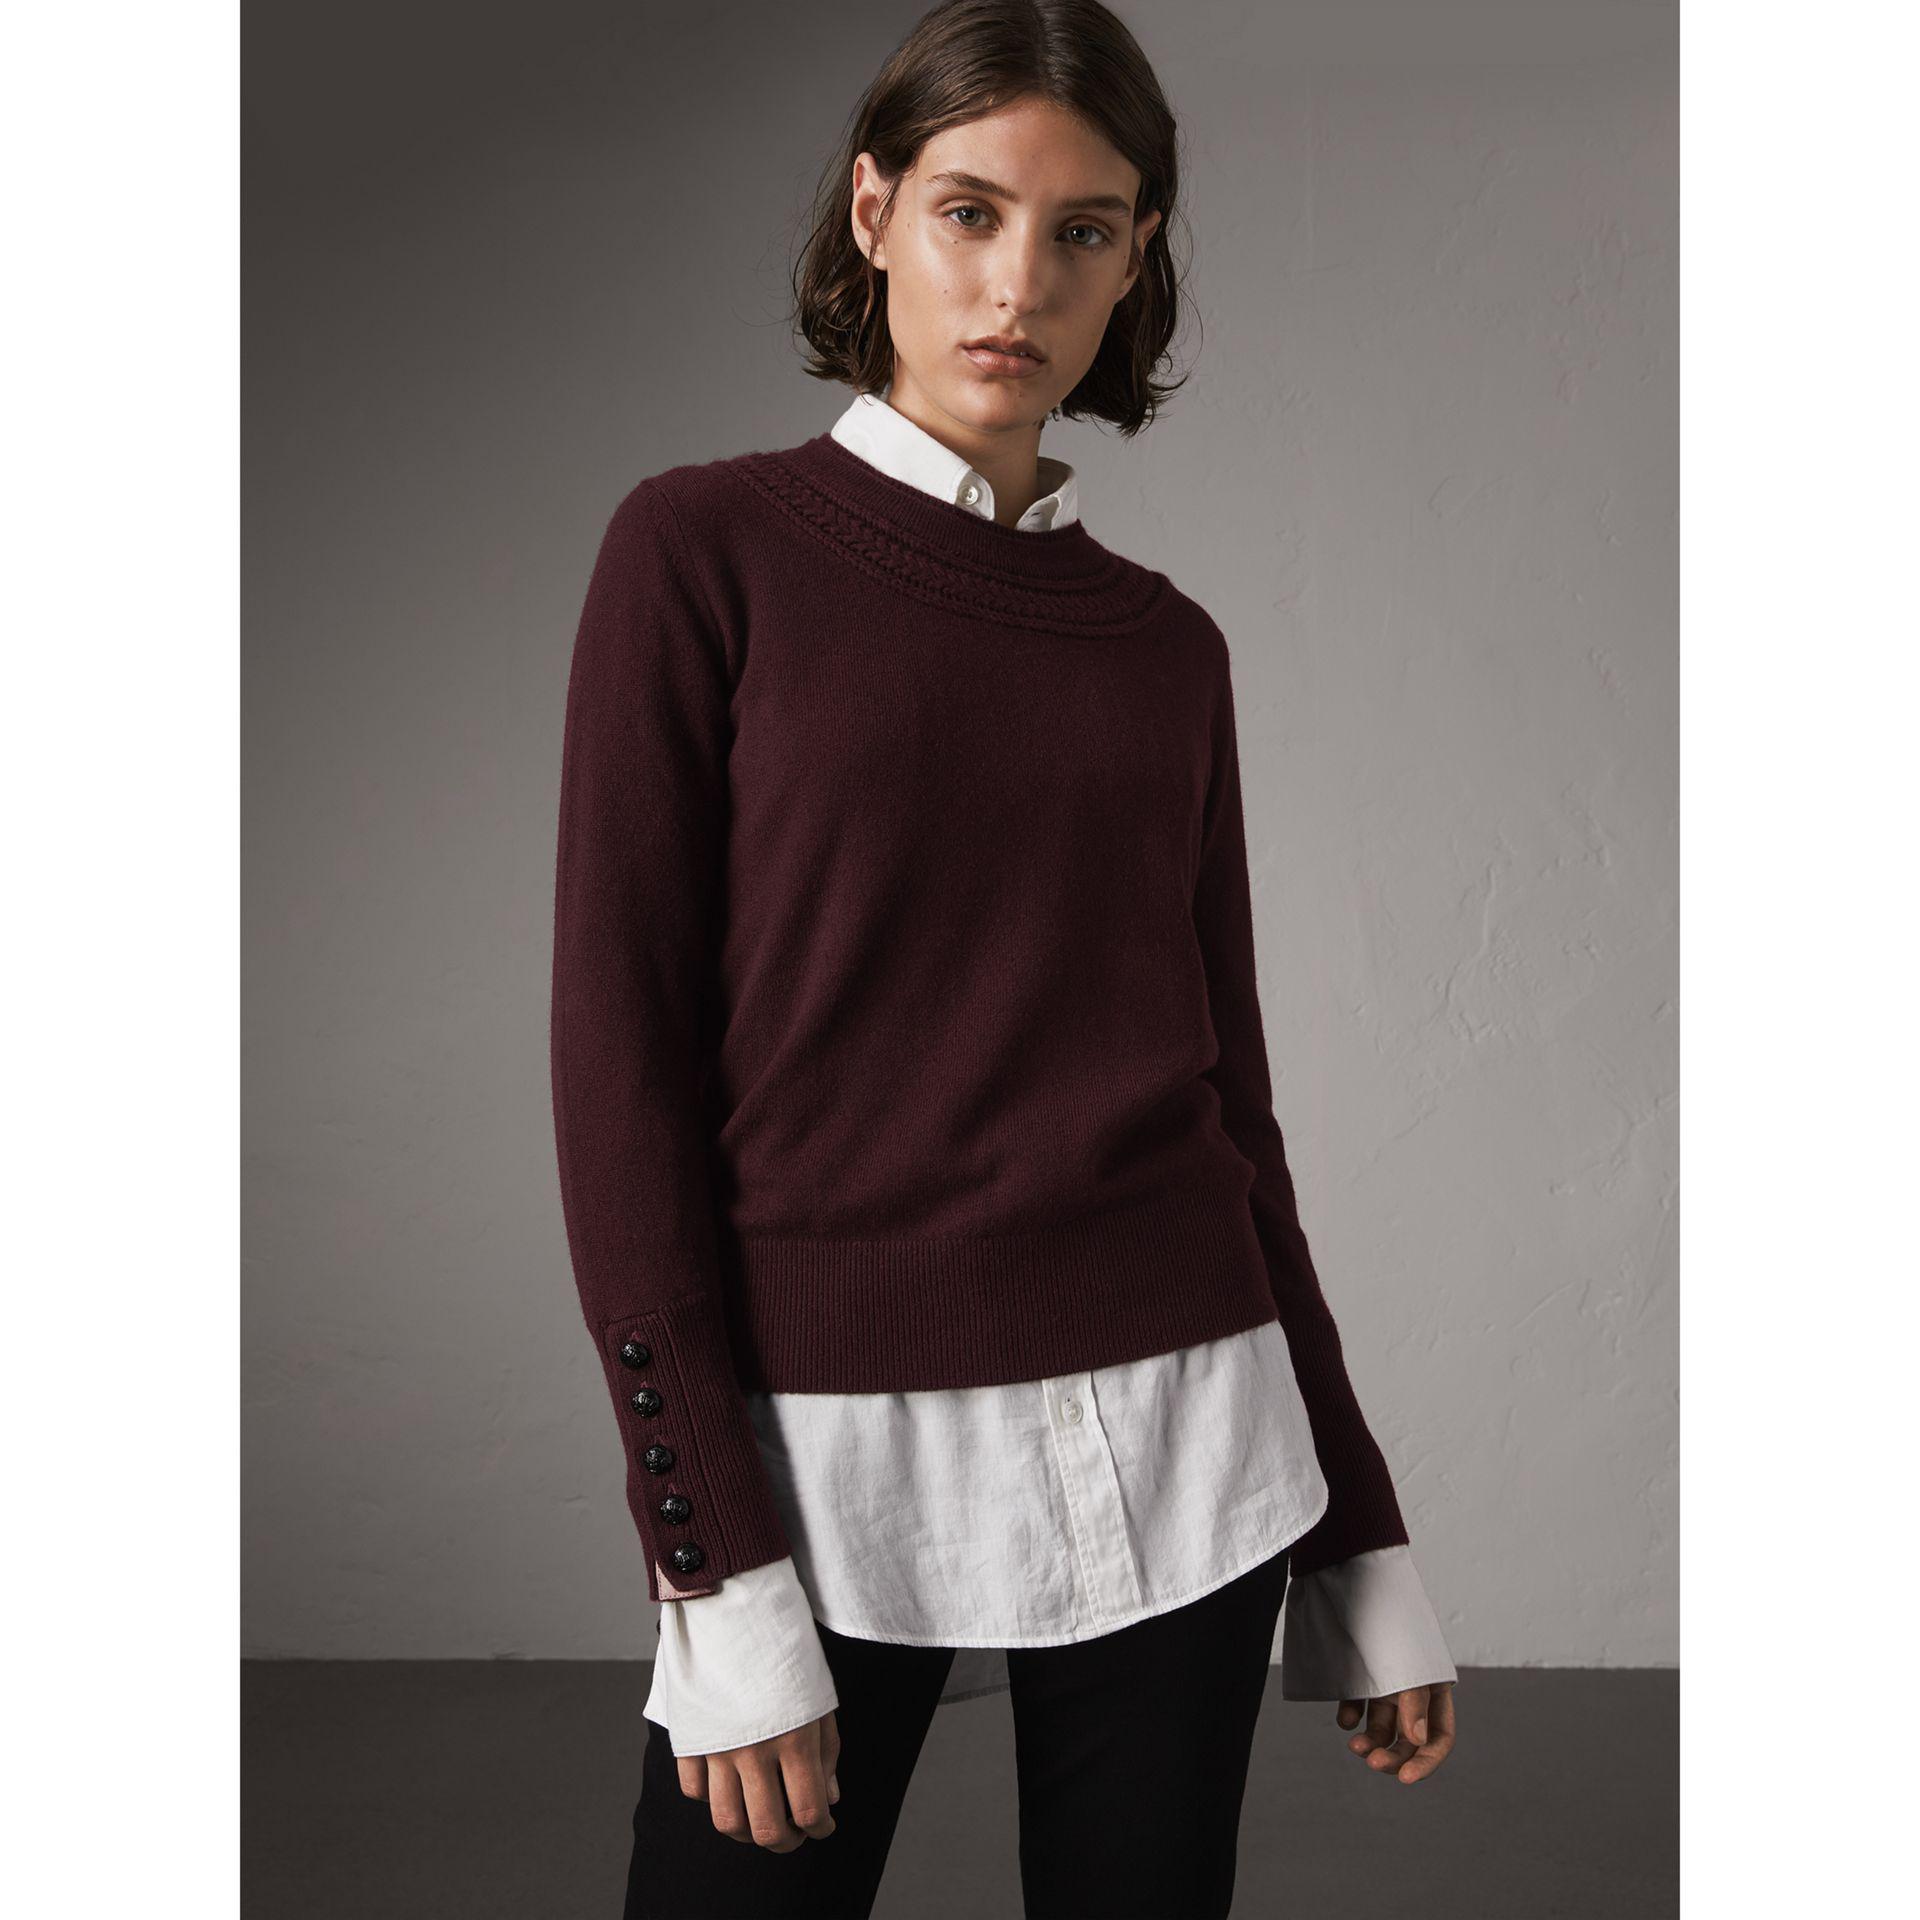 burberry cashmere sweater womens